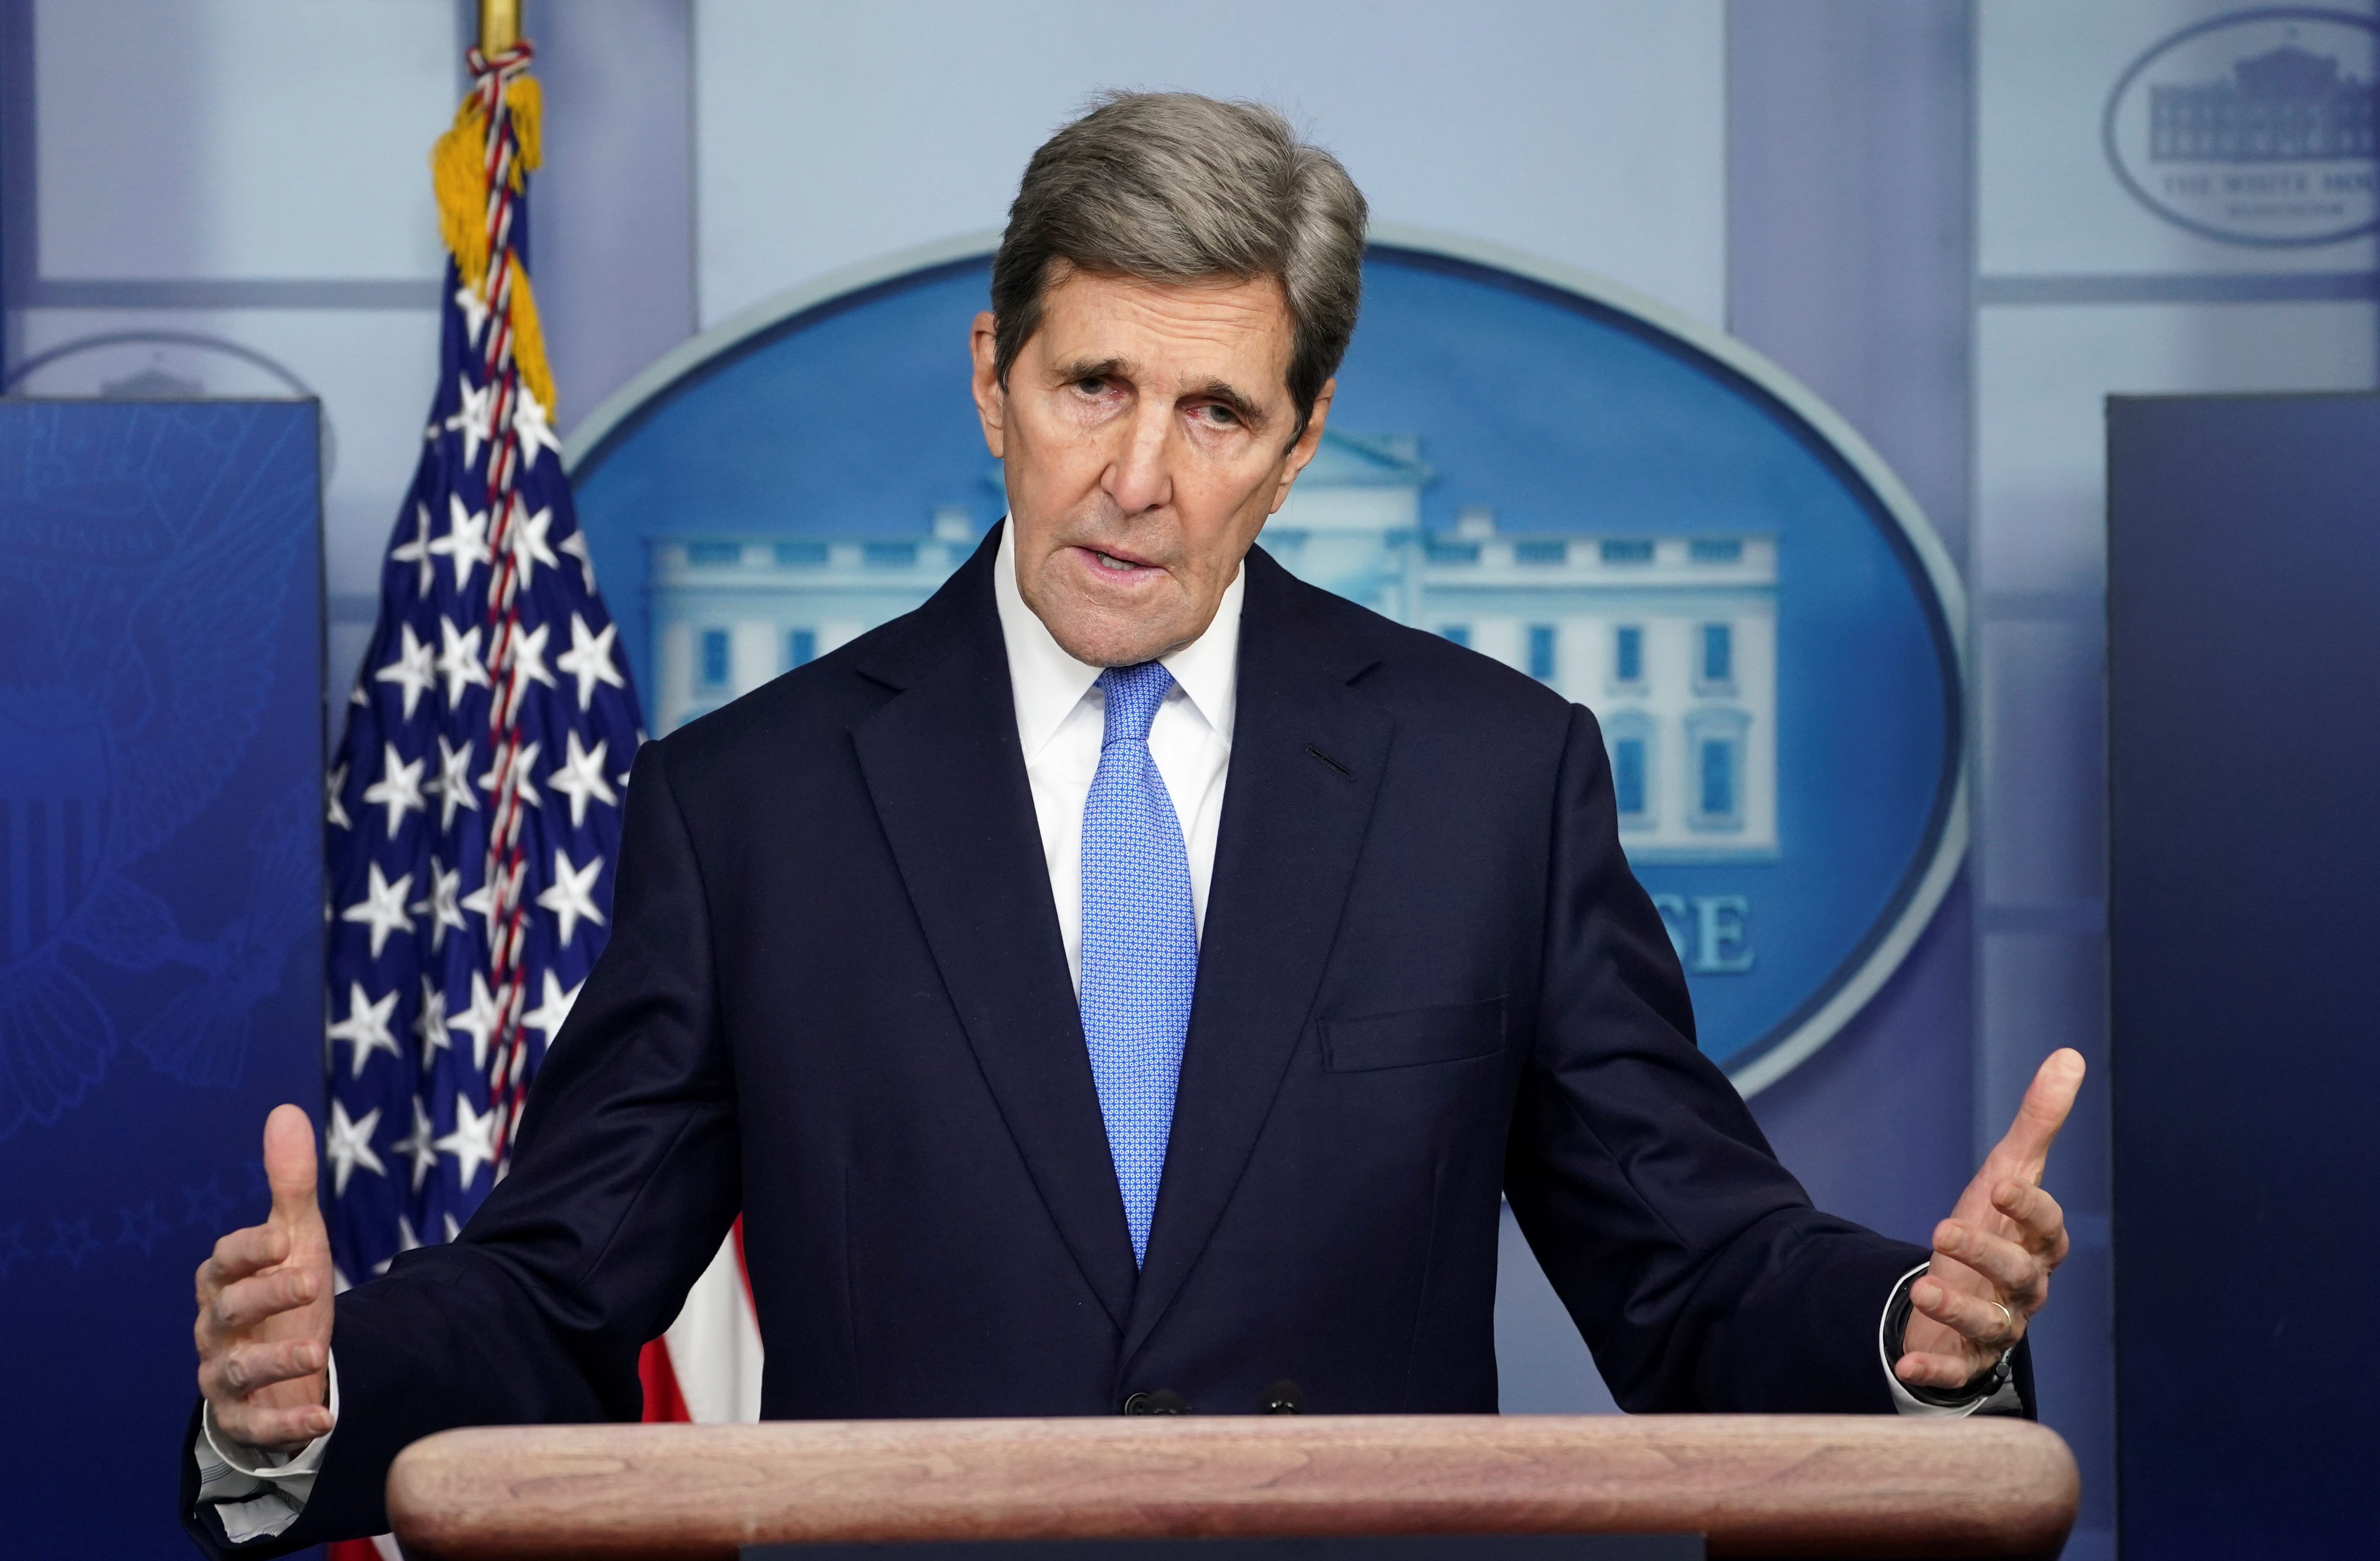 Big nations must stretch further to limit climate change – US envoy Kerry